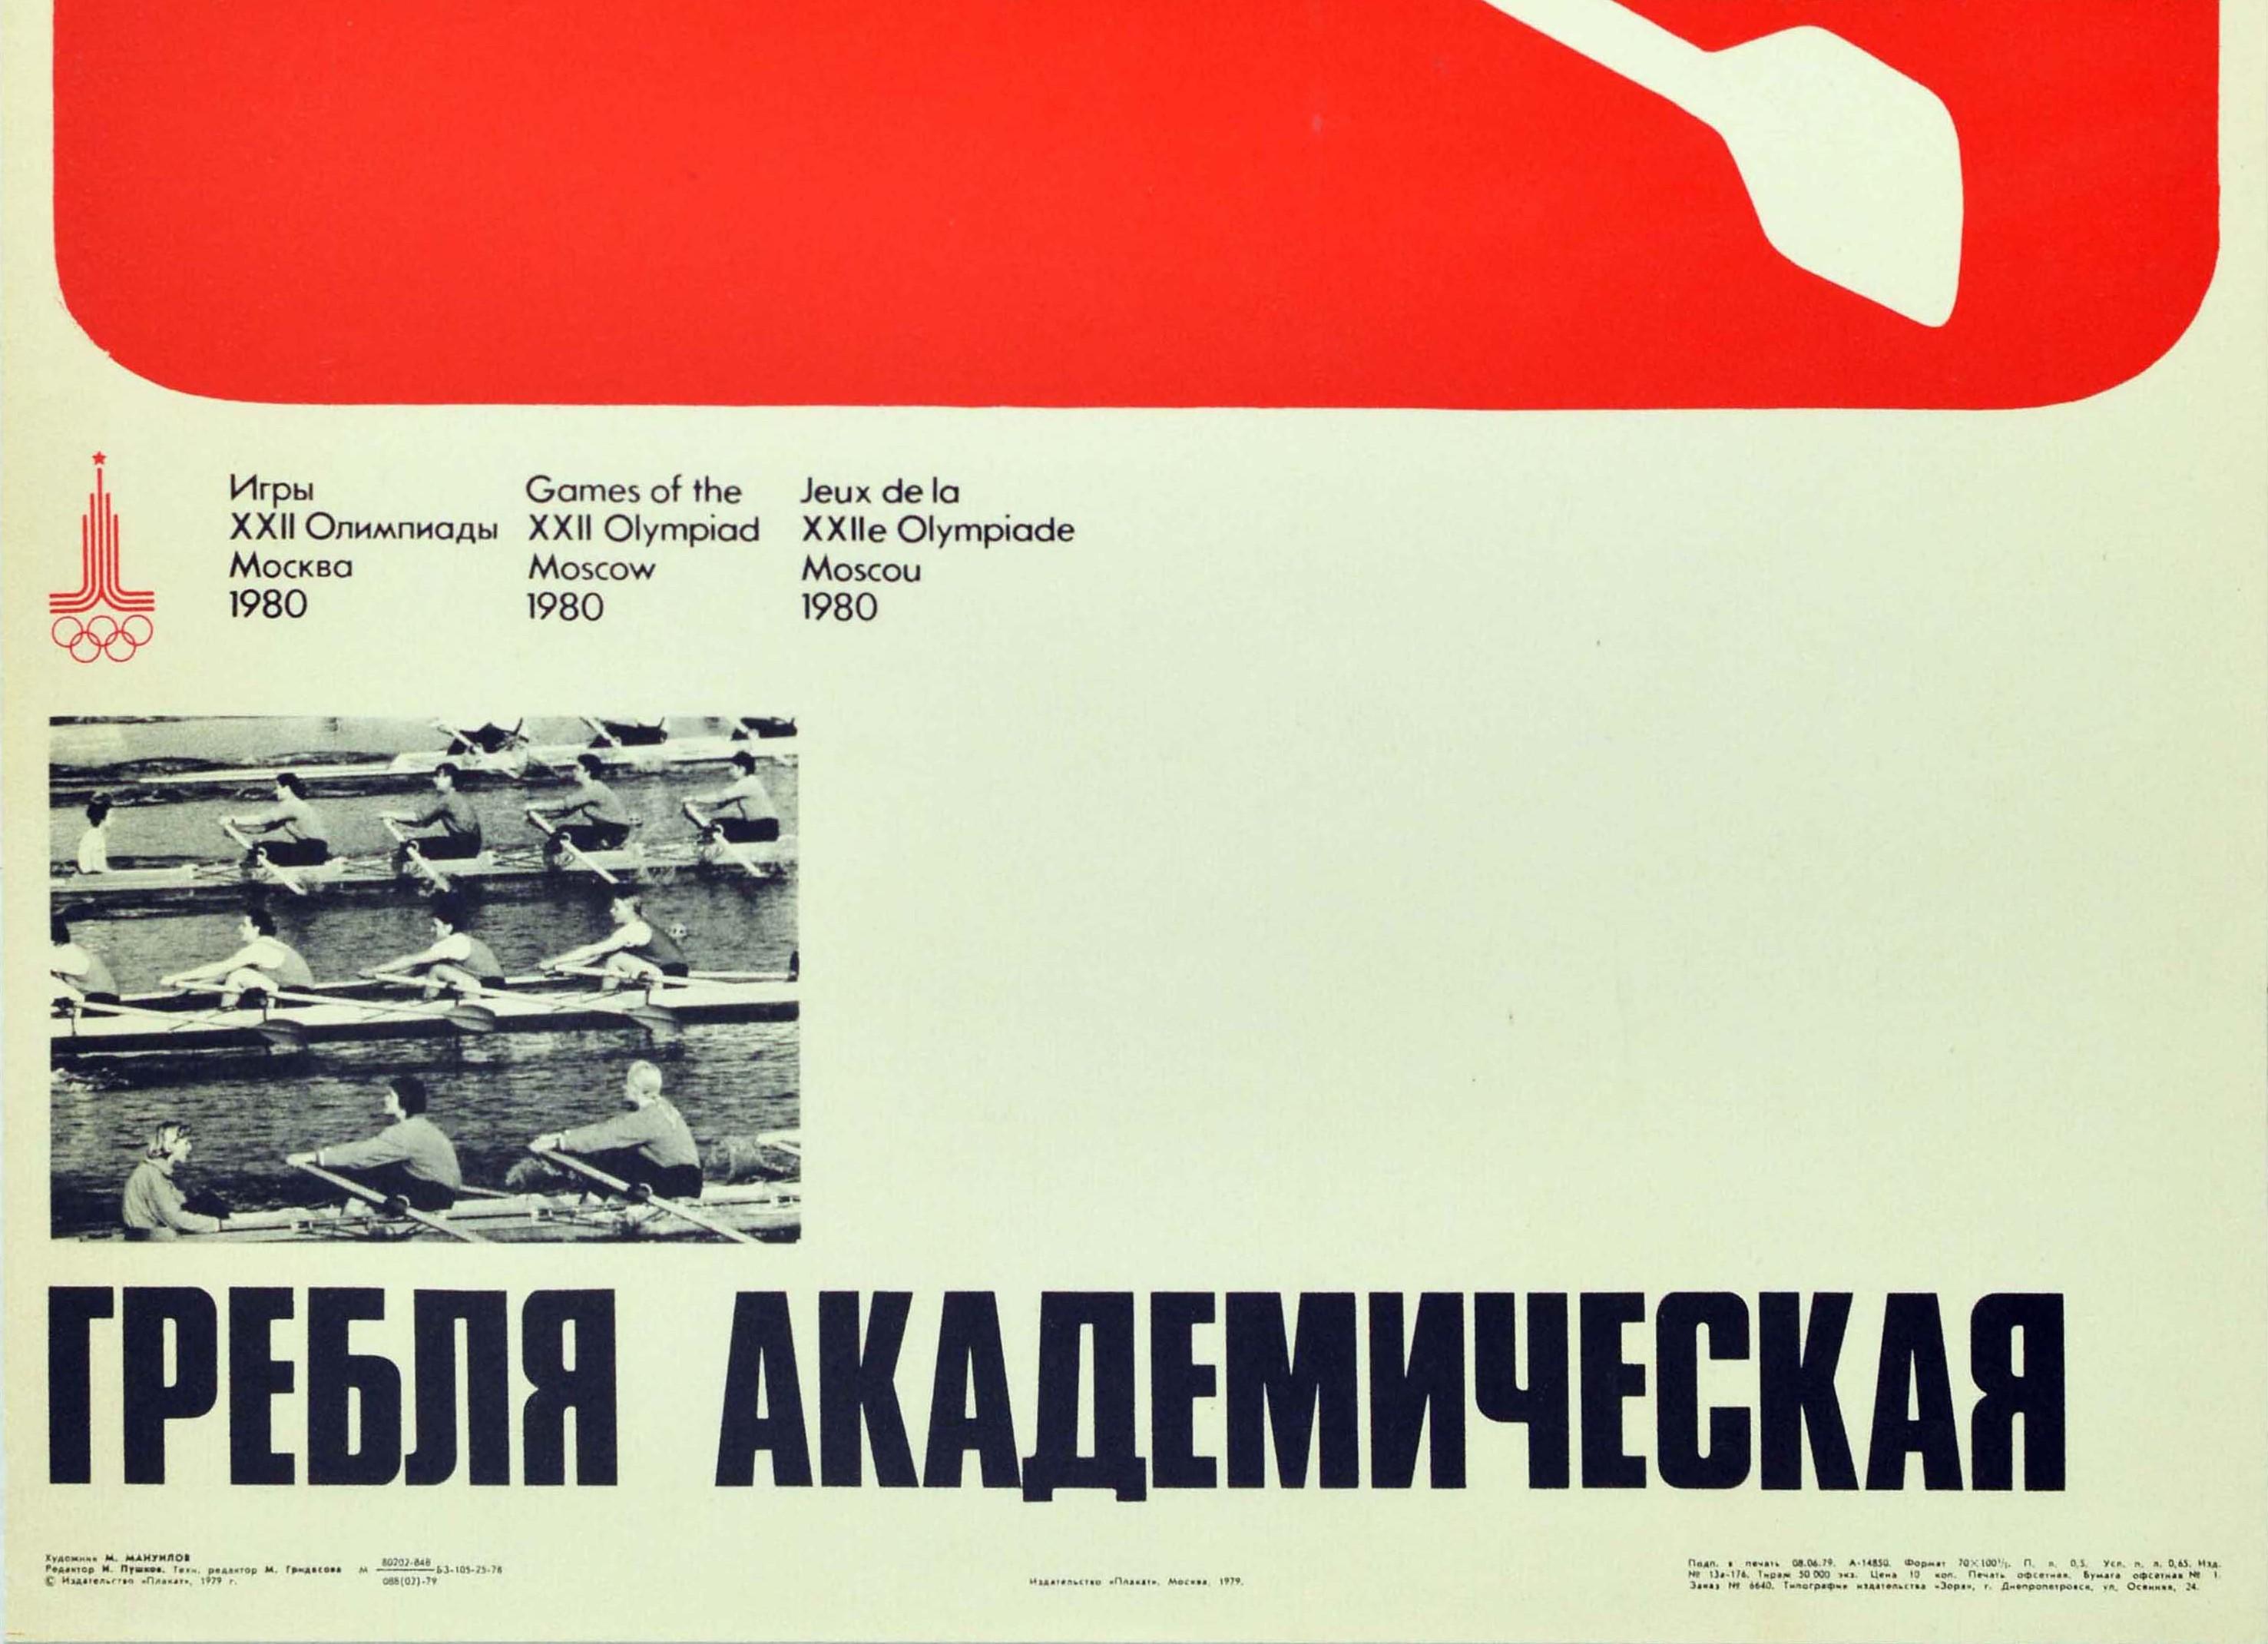 Original Vintage Sport Poster Moscow Olympics 1980 Pictogram Rowing Race Photo - Yellow Print by M Manuilov